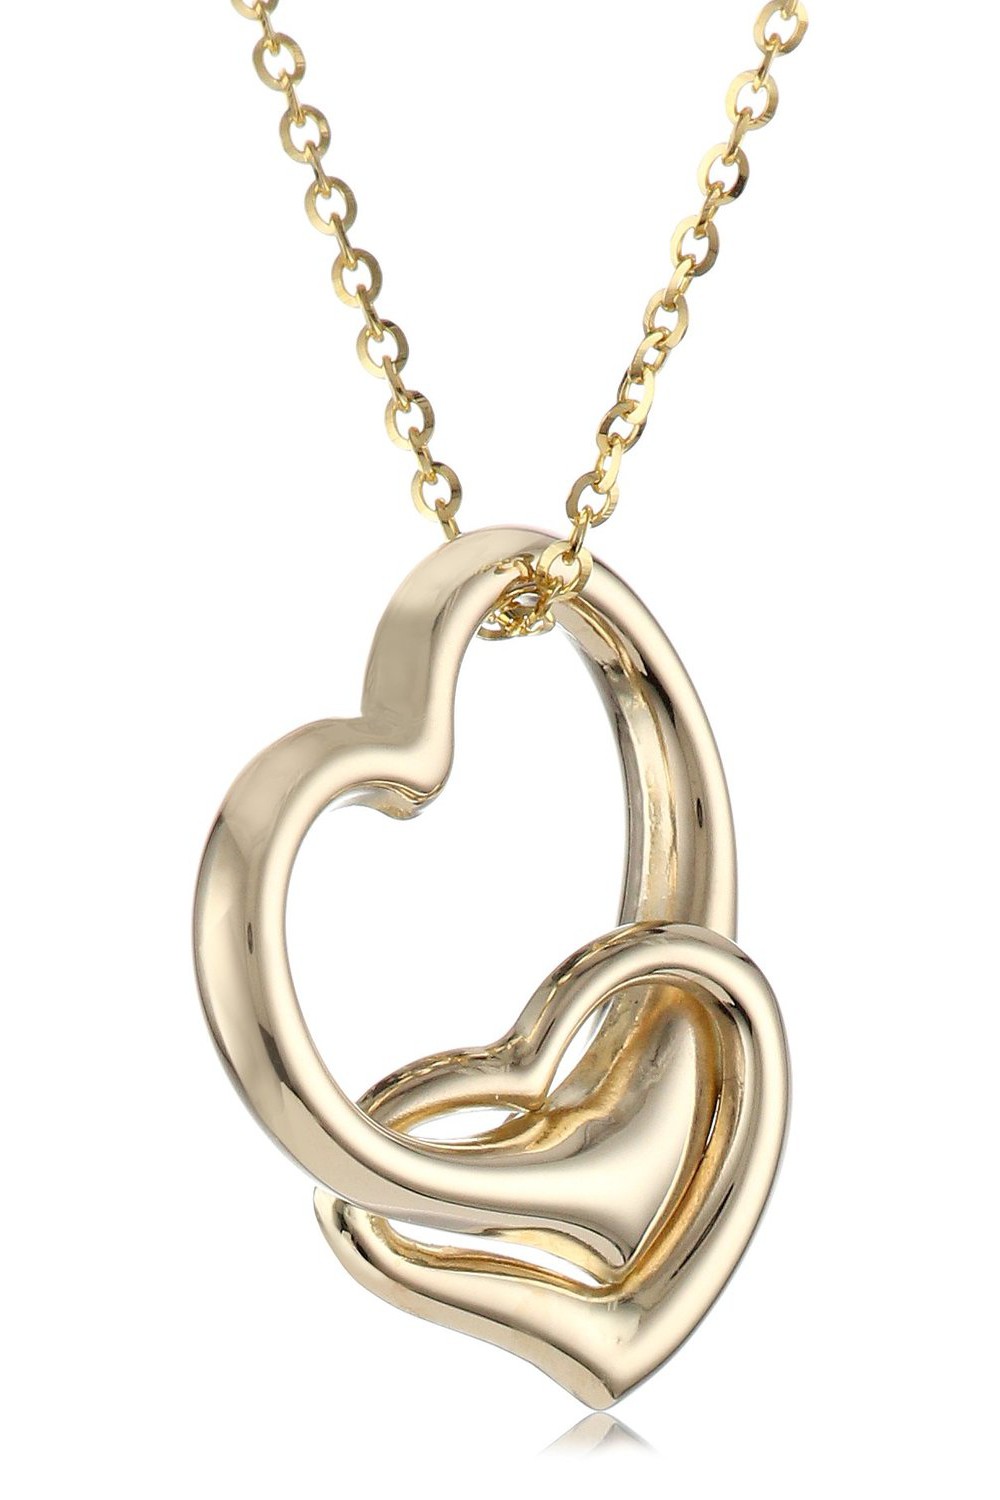 14k Yellow Gold Double Heart Pendant Necklace, 16" - Visuall.co